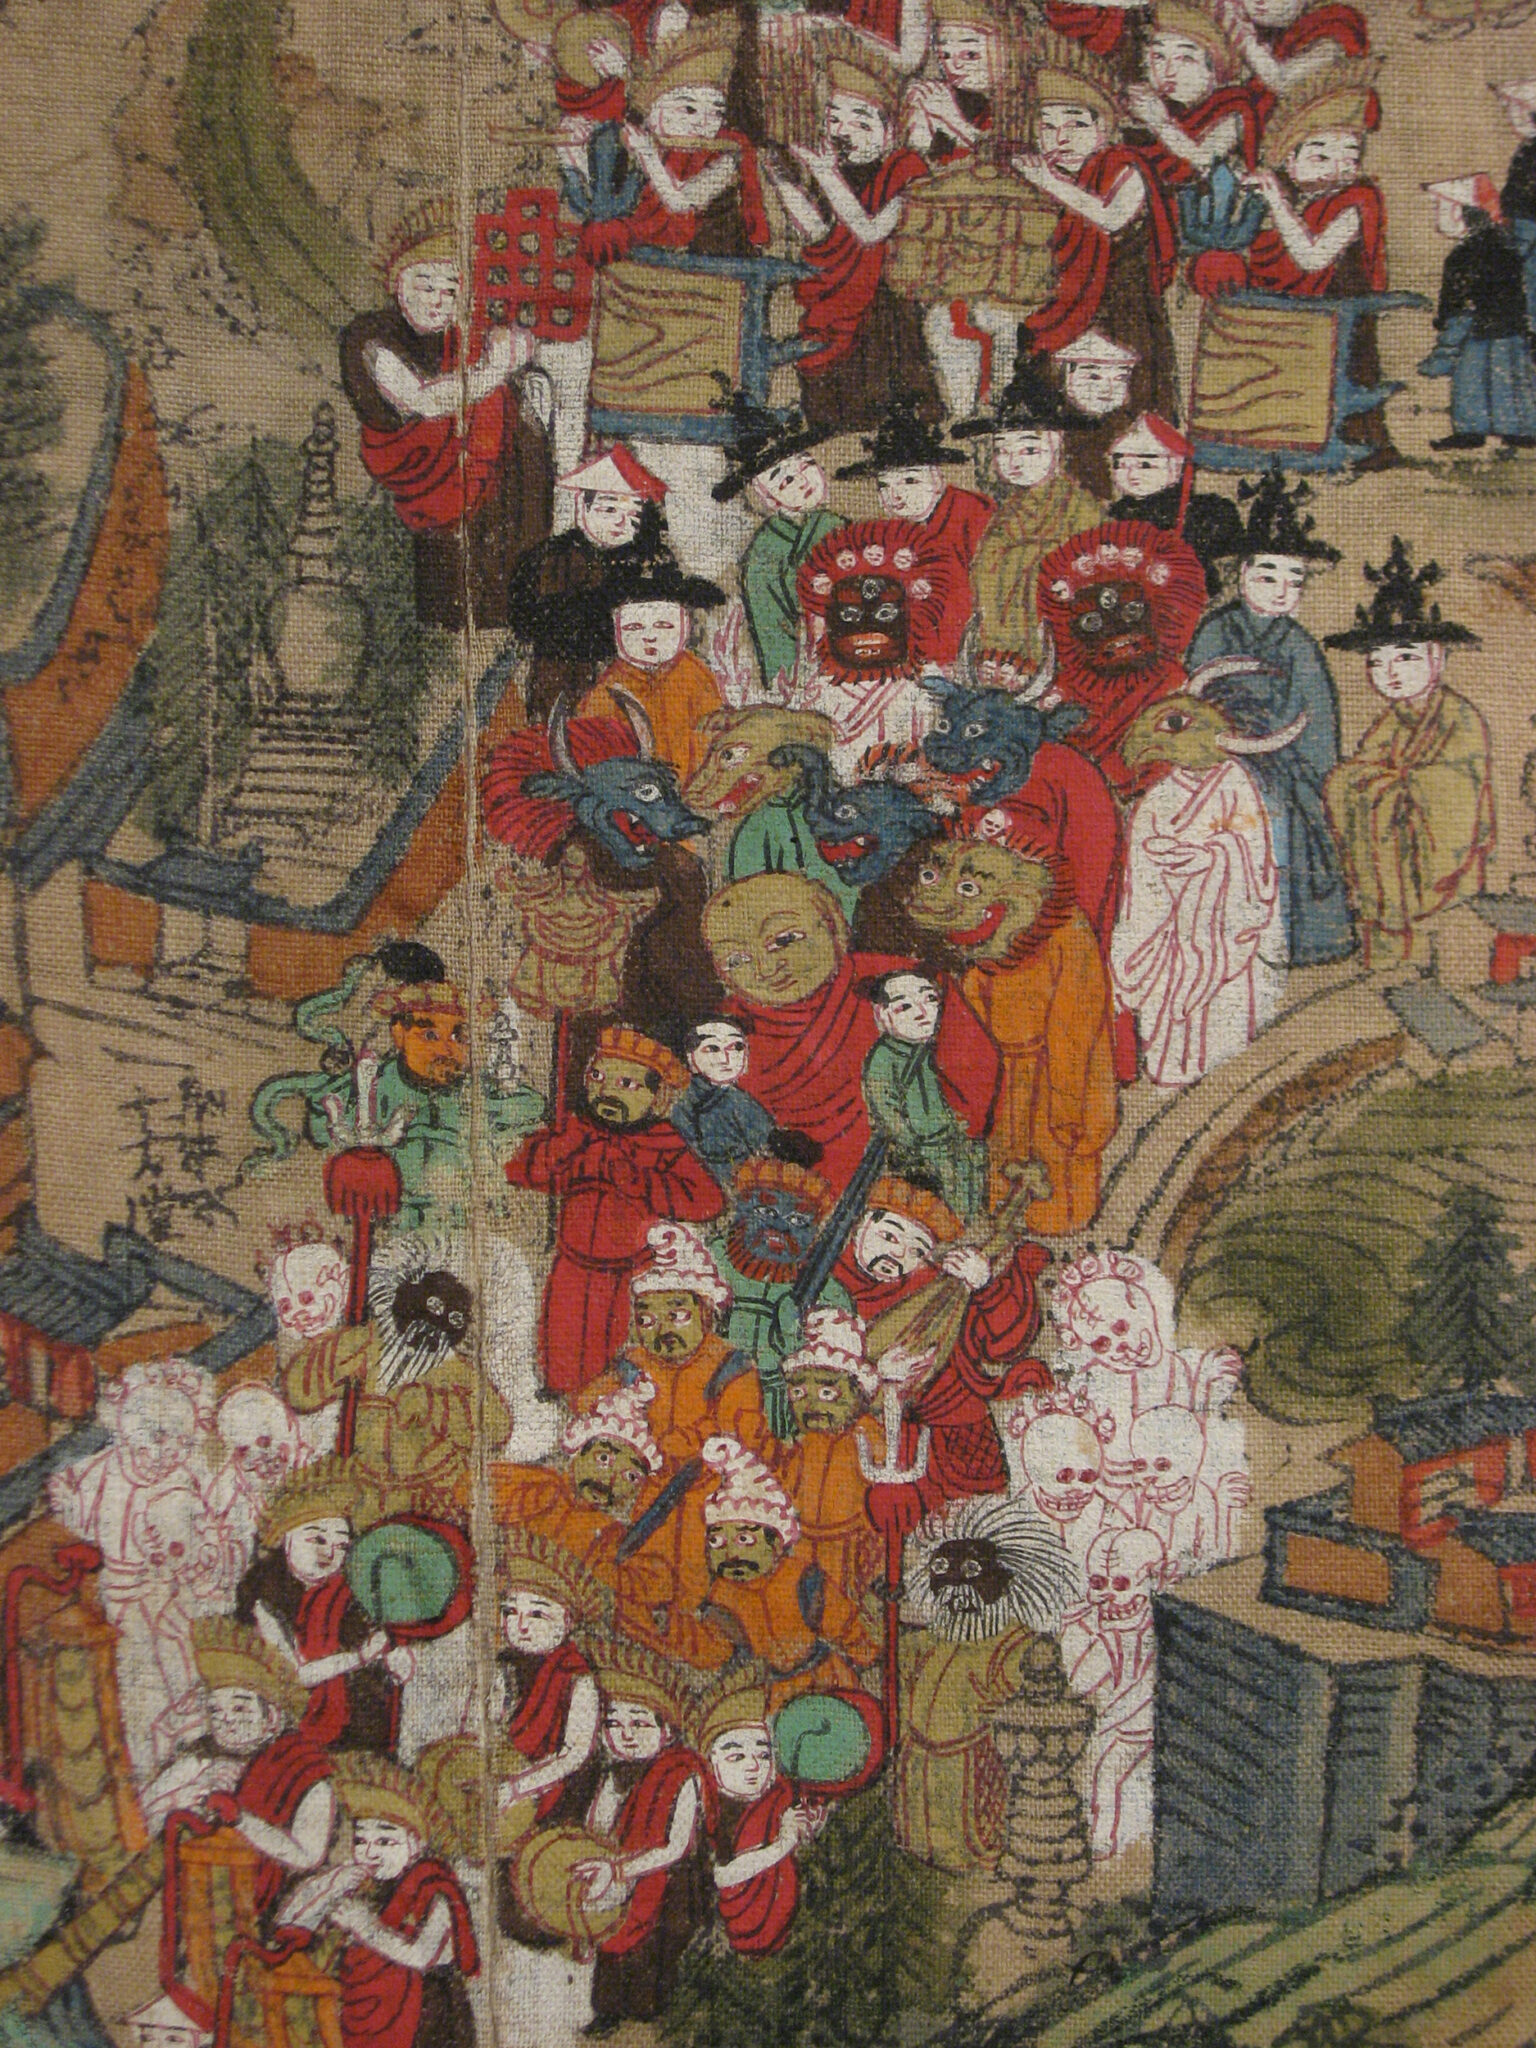 Procession of monks playing musical instruments and figures wearing pointed hats and fantastical, macabre masks